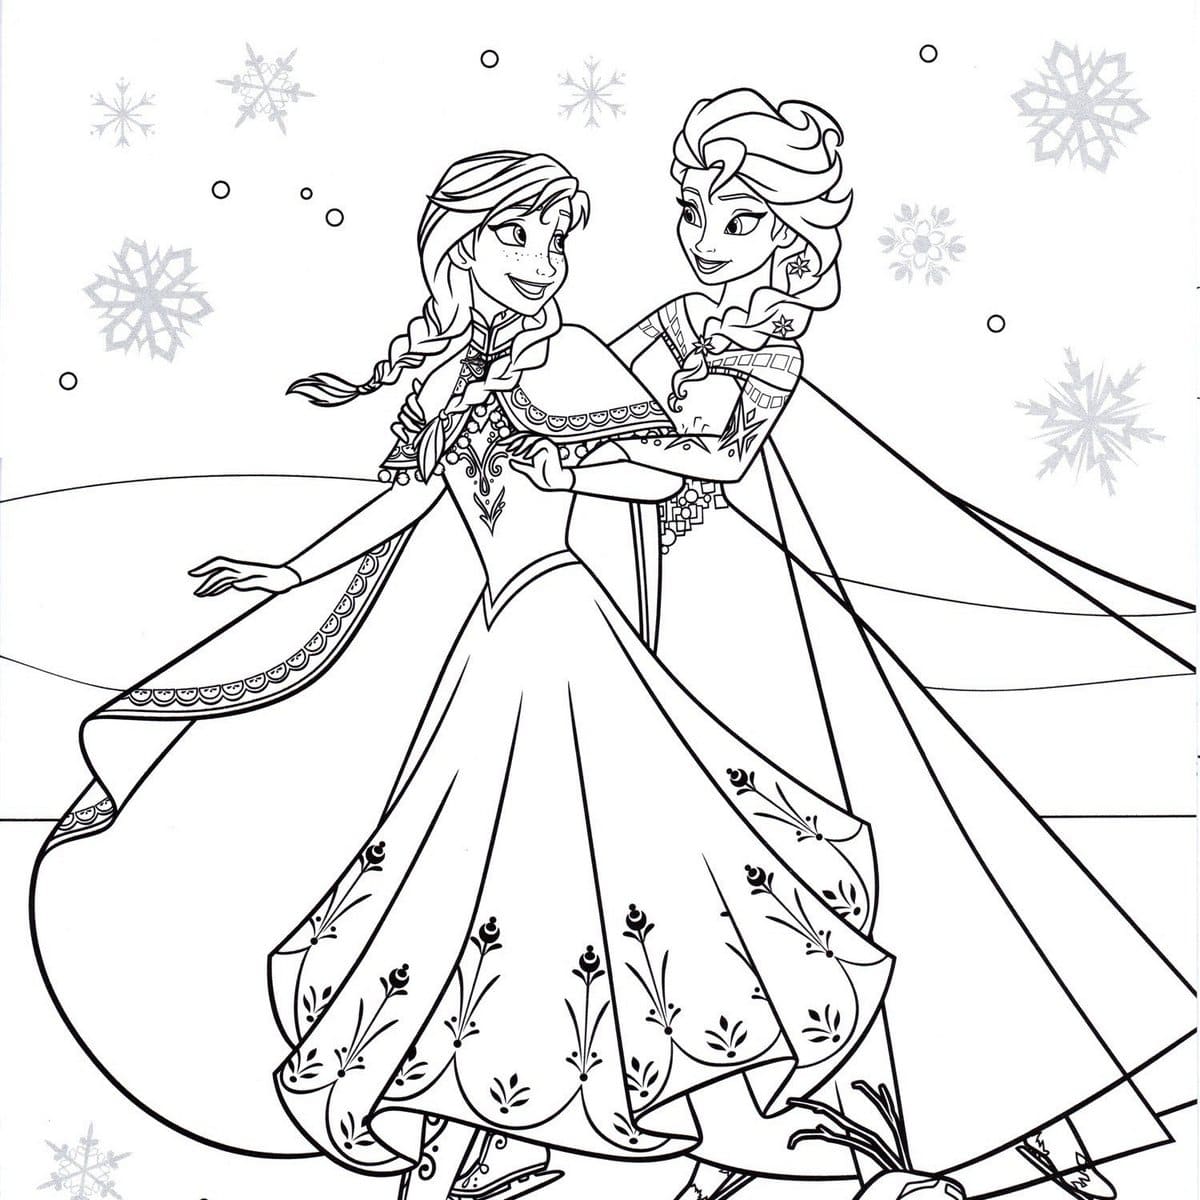 Elsa Coloring Pages   Best Coloring Pages for Girls